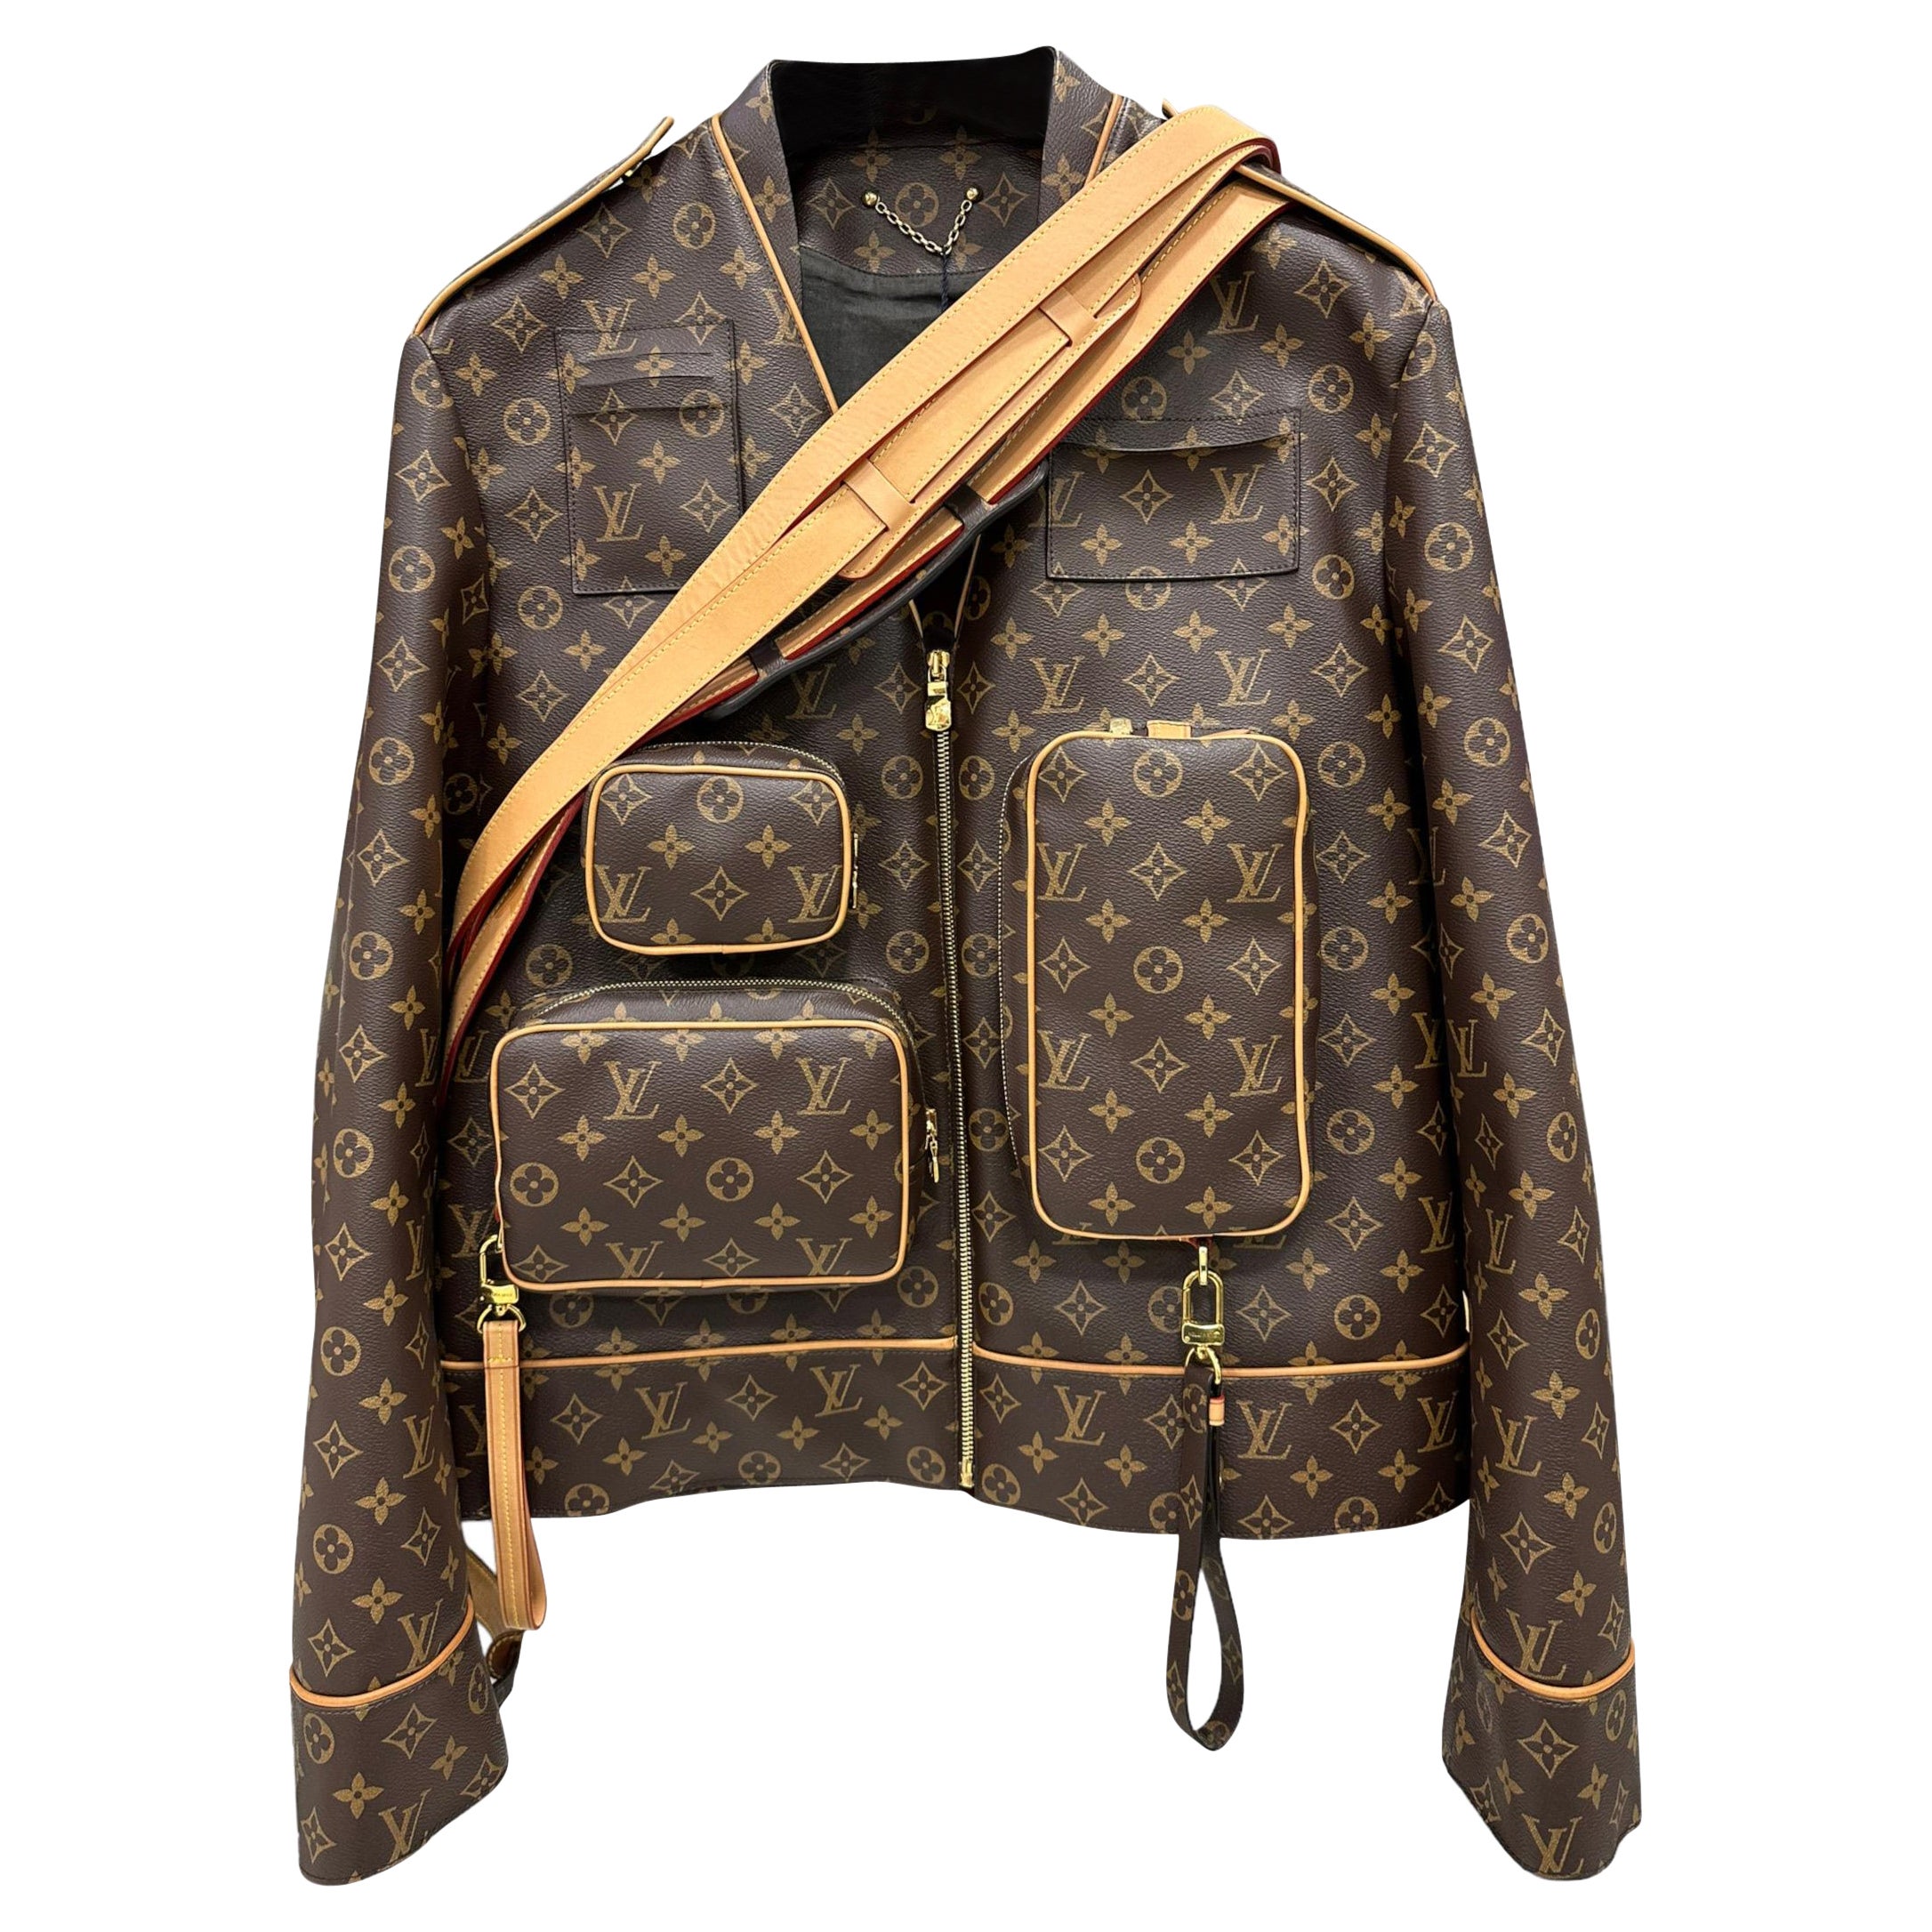 Louis Vuitton Jackets for Men for Sale, Shop New & Used